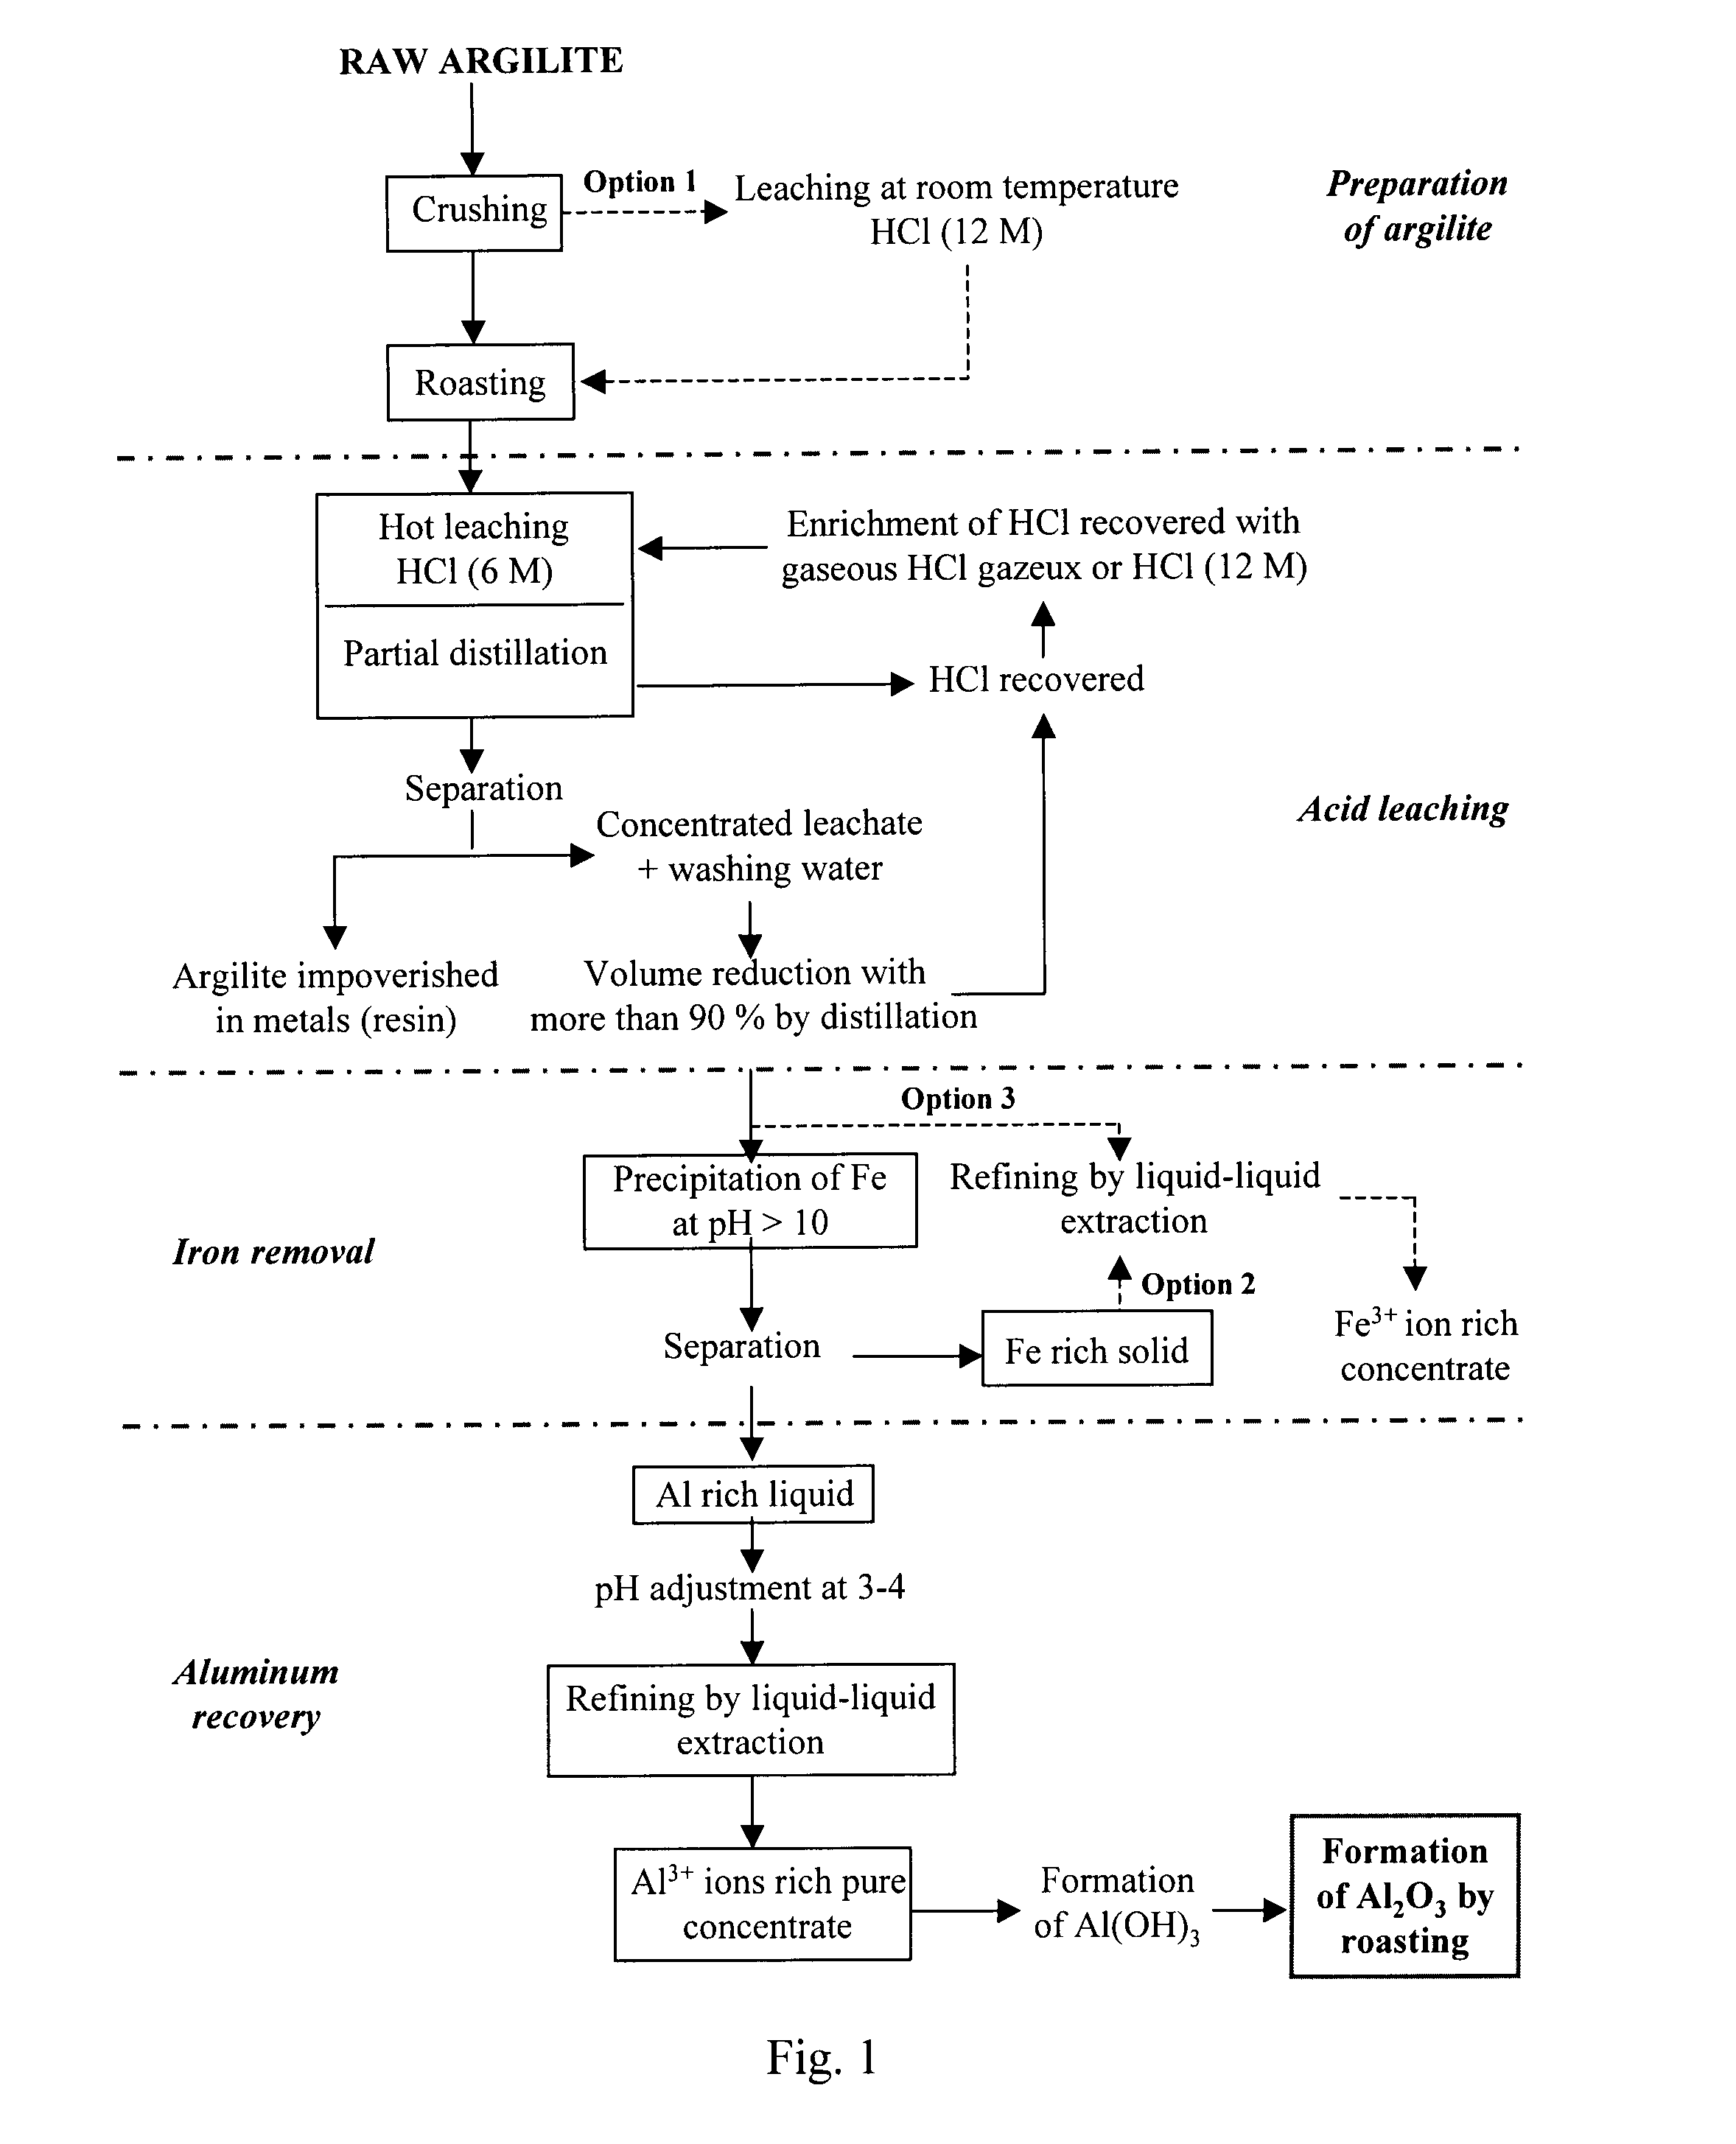 Processes for extracting aluminum and iron from aluminous ores